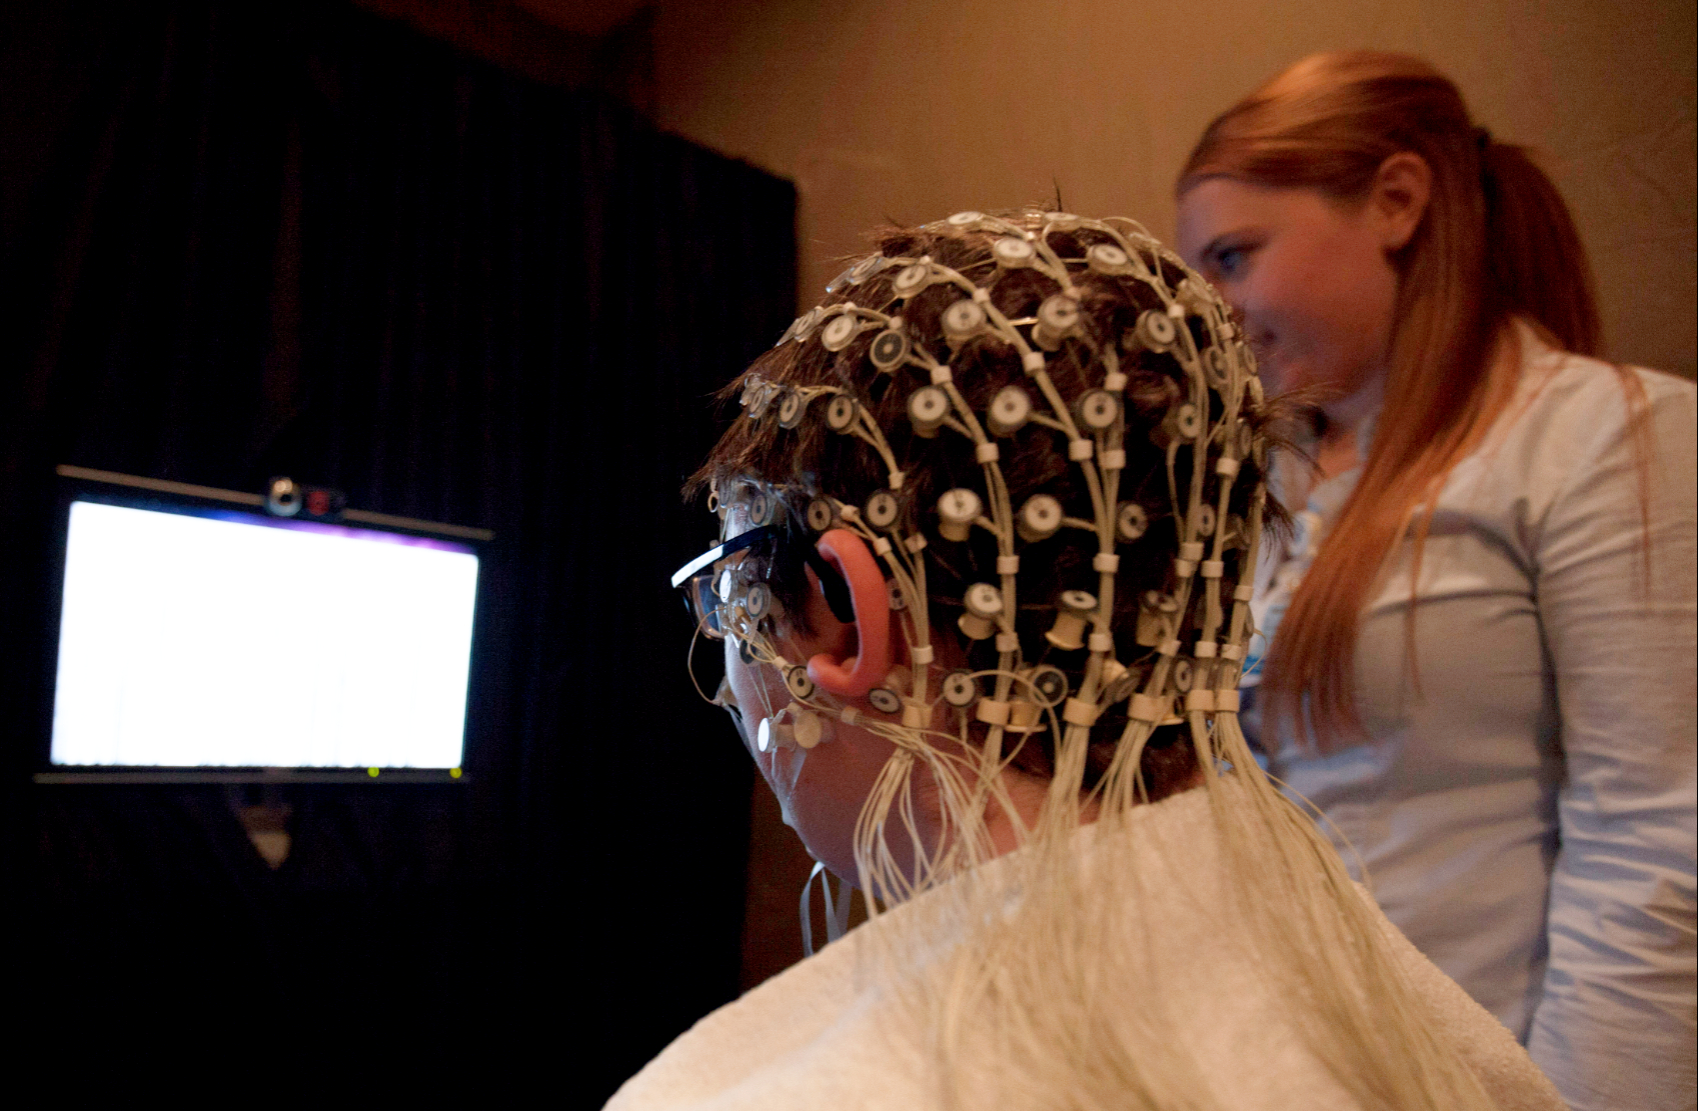 A child wearing an electroencephalogram cap looking at a bright screen, with someone standing nearby.